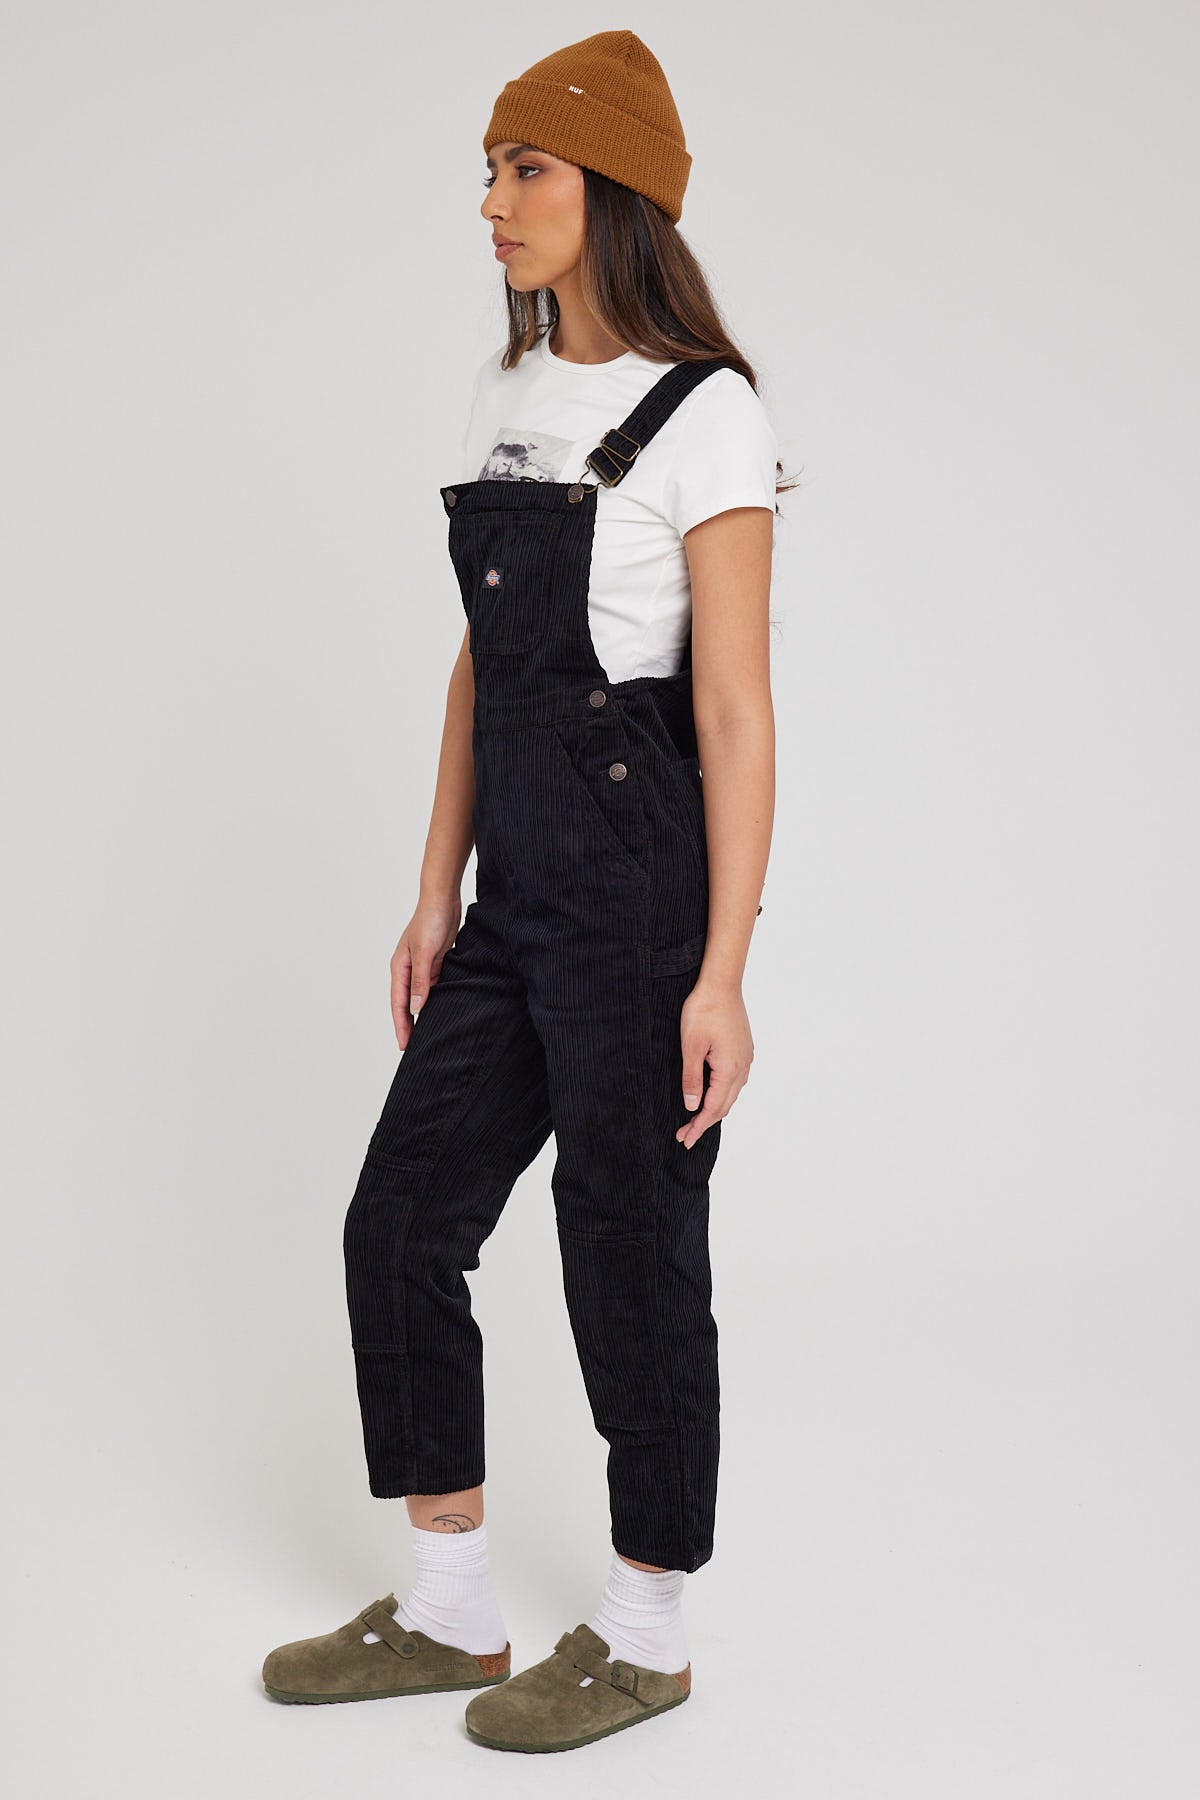 Dickies Whitney Cord Overall Black